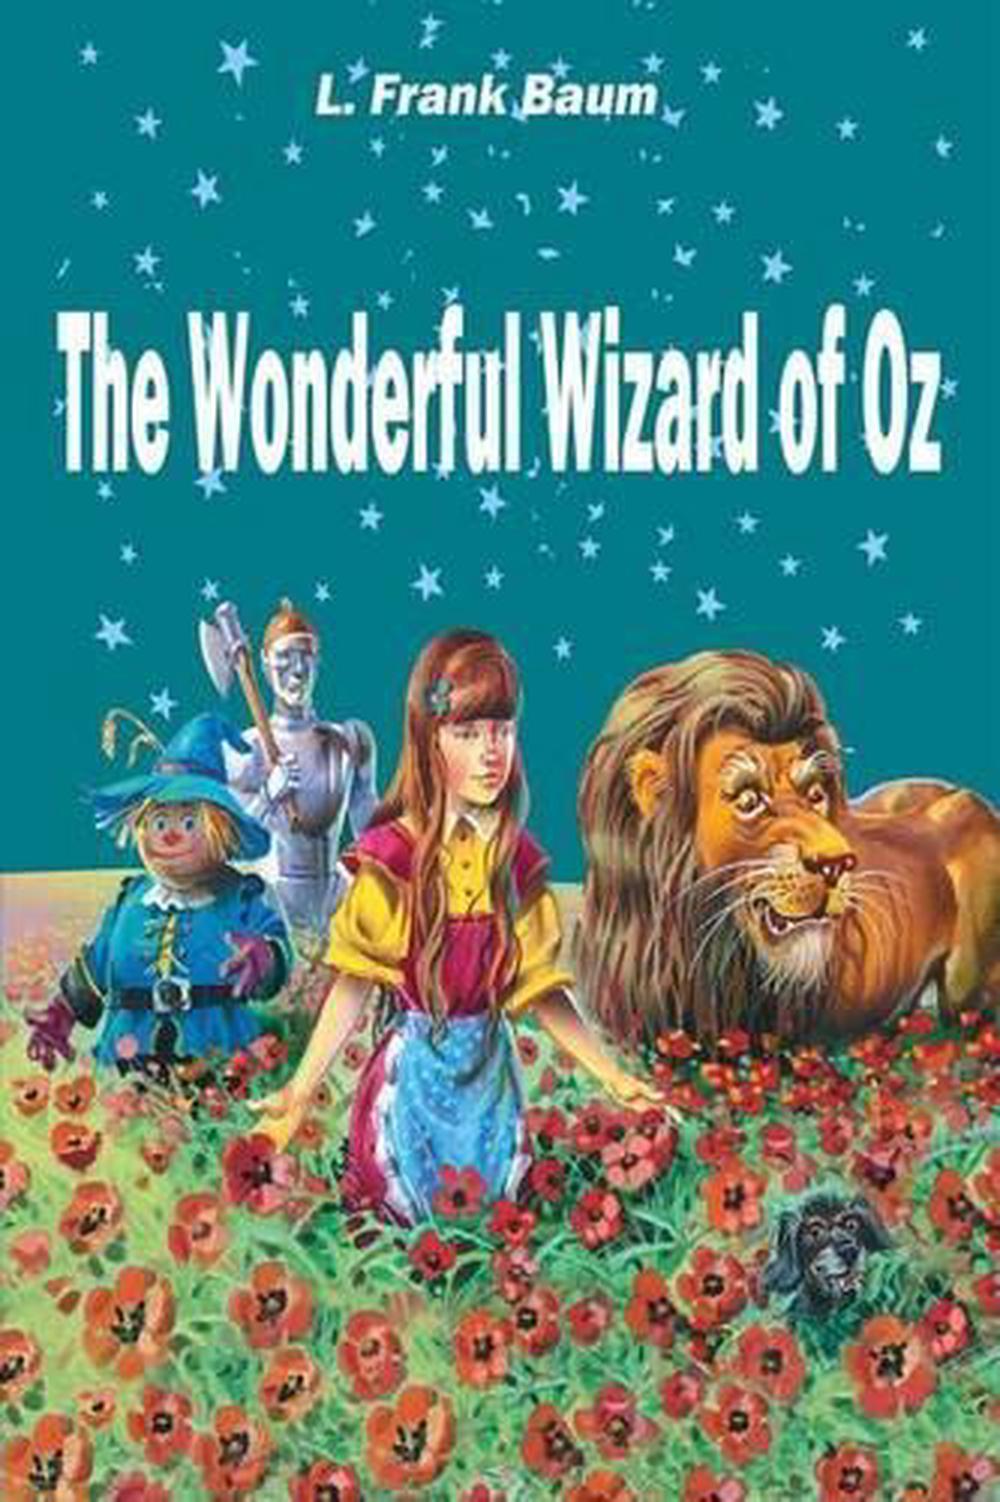 The Wizard of Oz and Other Wonderful Books of Oz by L. Frank Baum